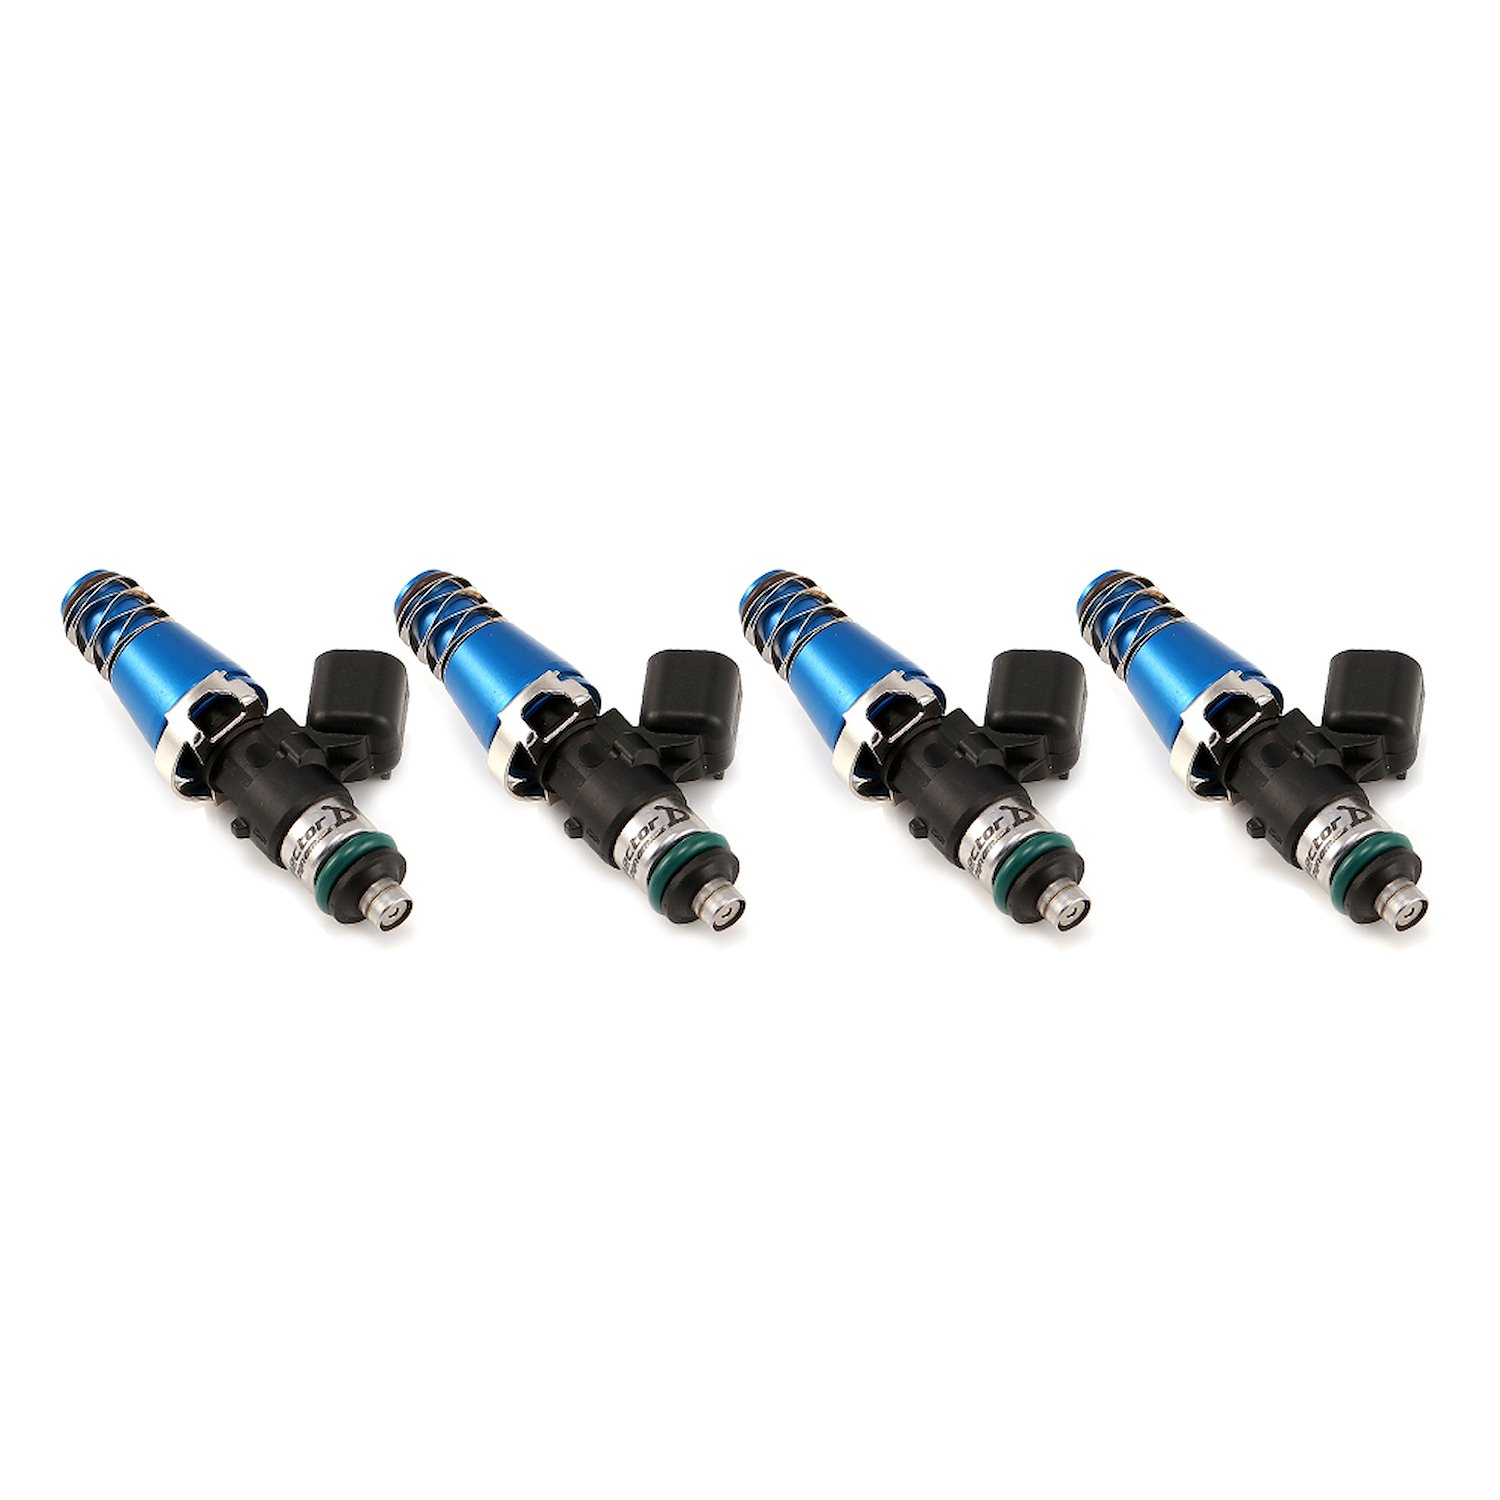 1300.60.11.14.4 1340cc Fuel Injector Set, 60 mm Length, 11 mm Blue Top, 14 mm Lower O-Ring